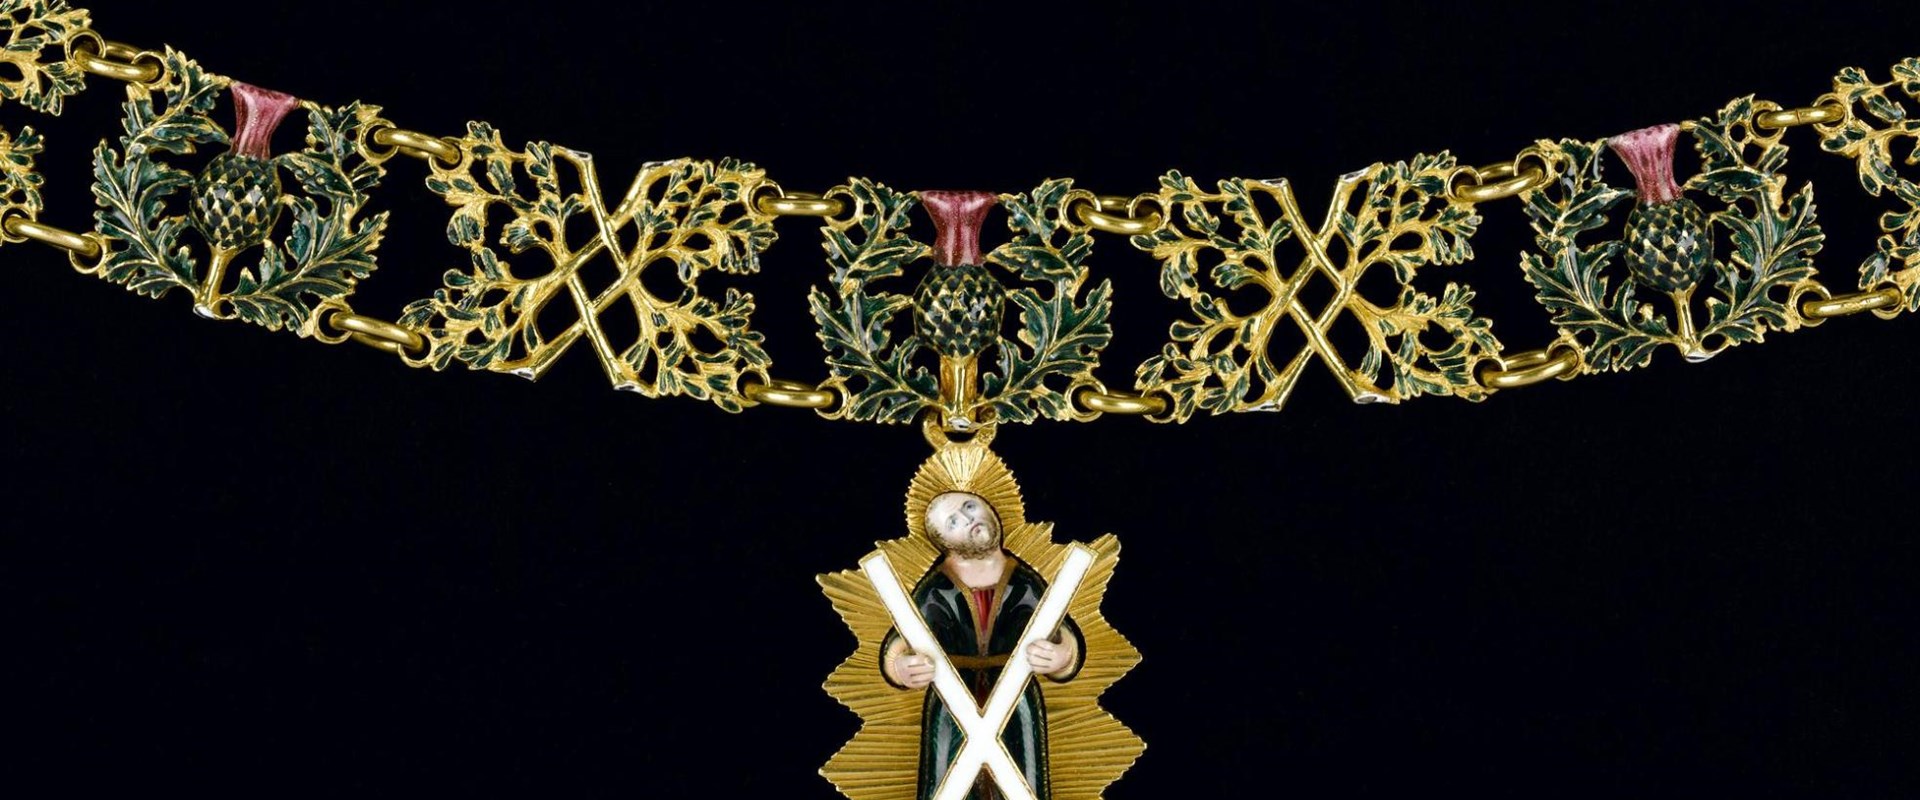 Gold and enamel pendant badge of the Order of the Thistle